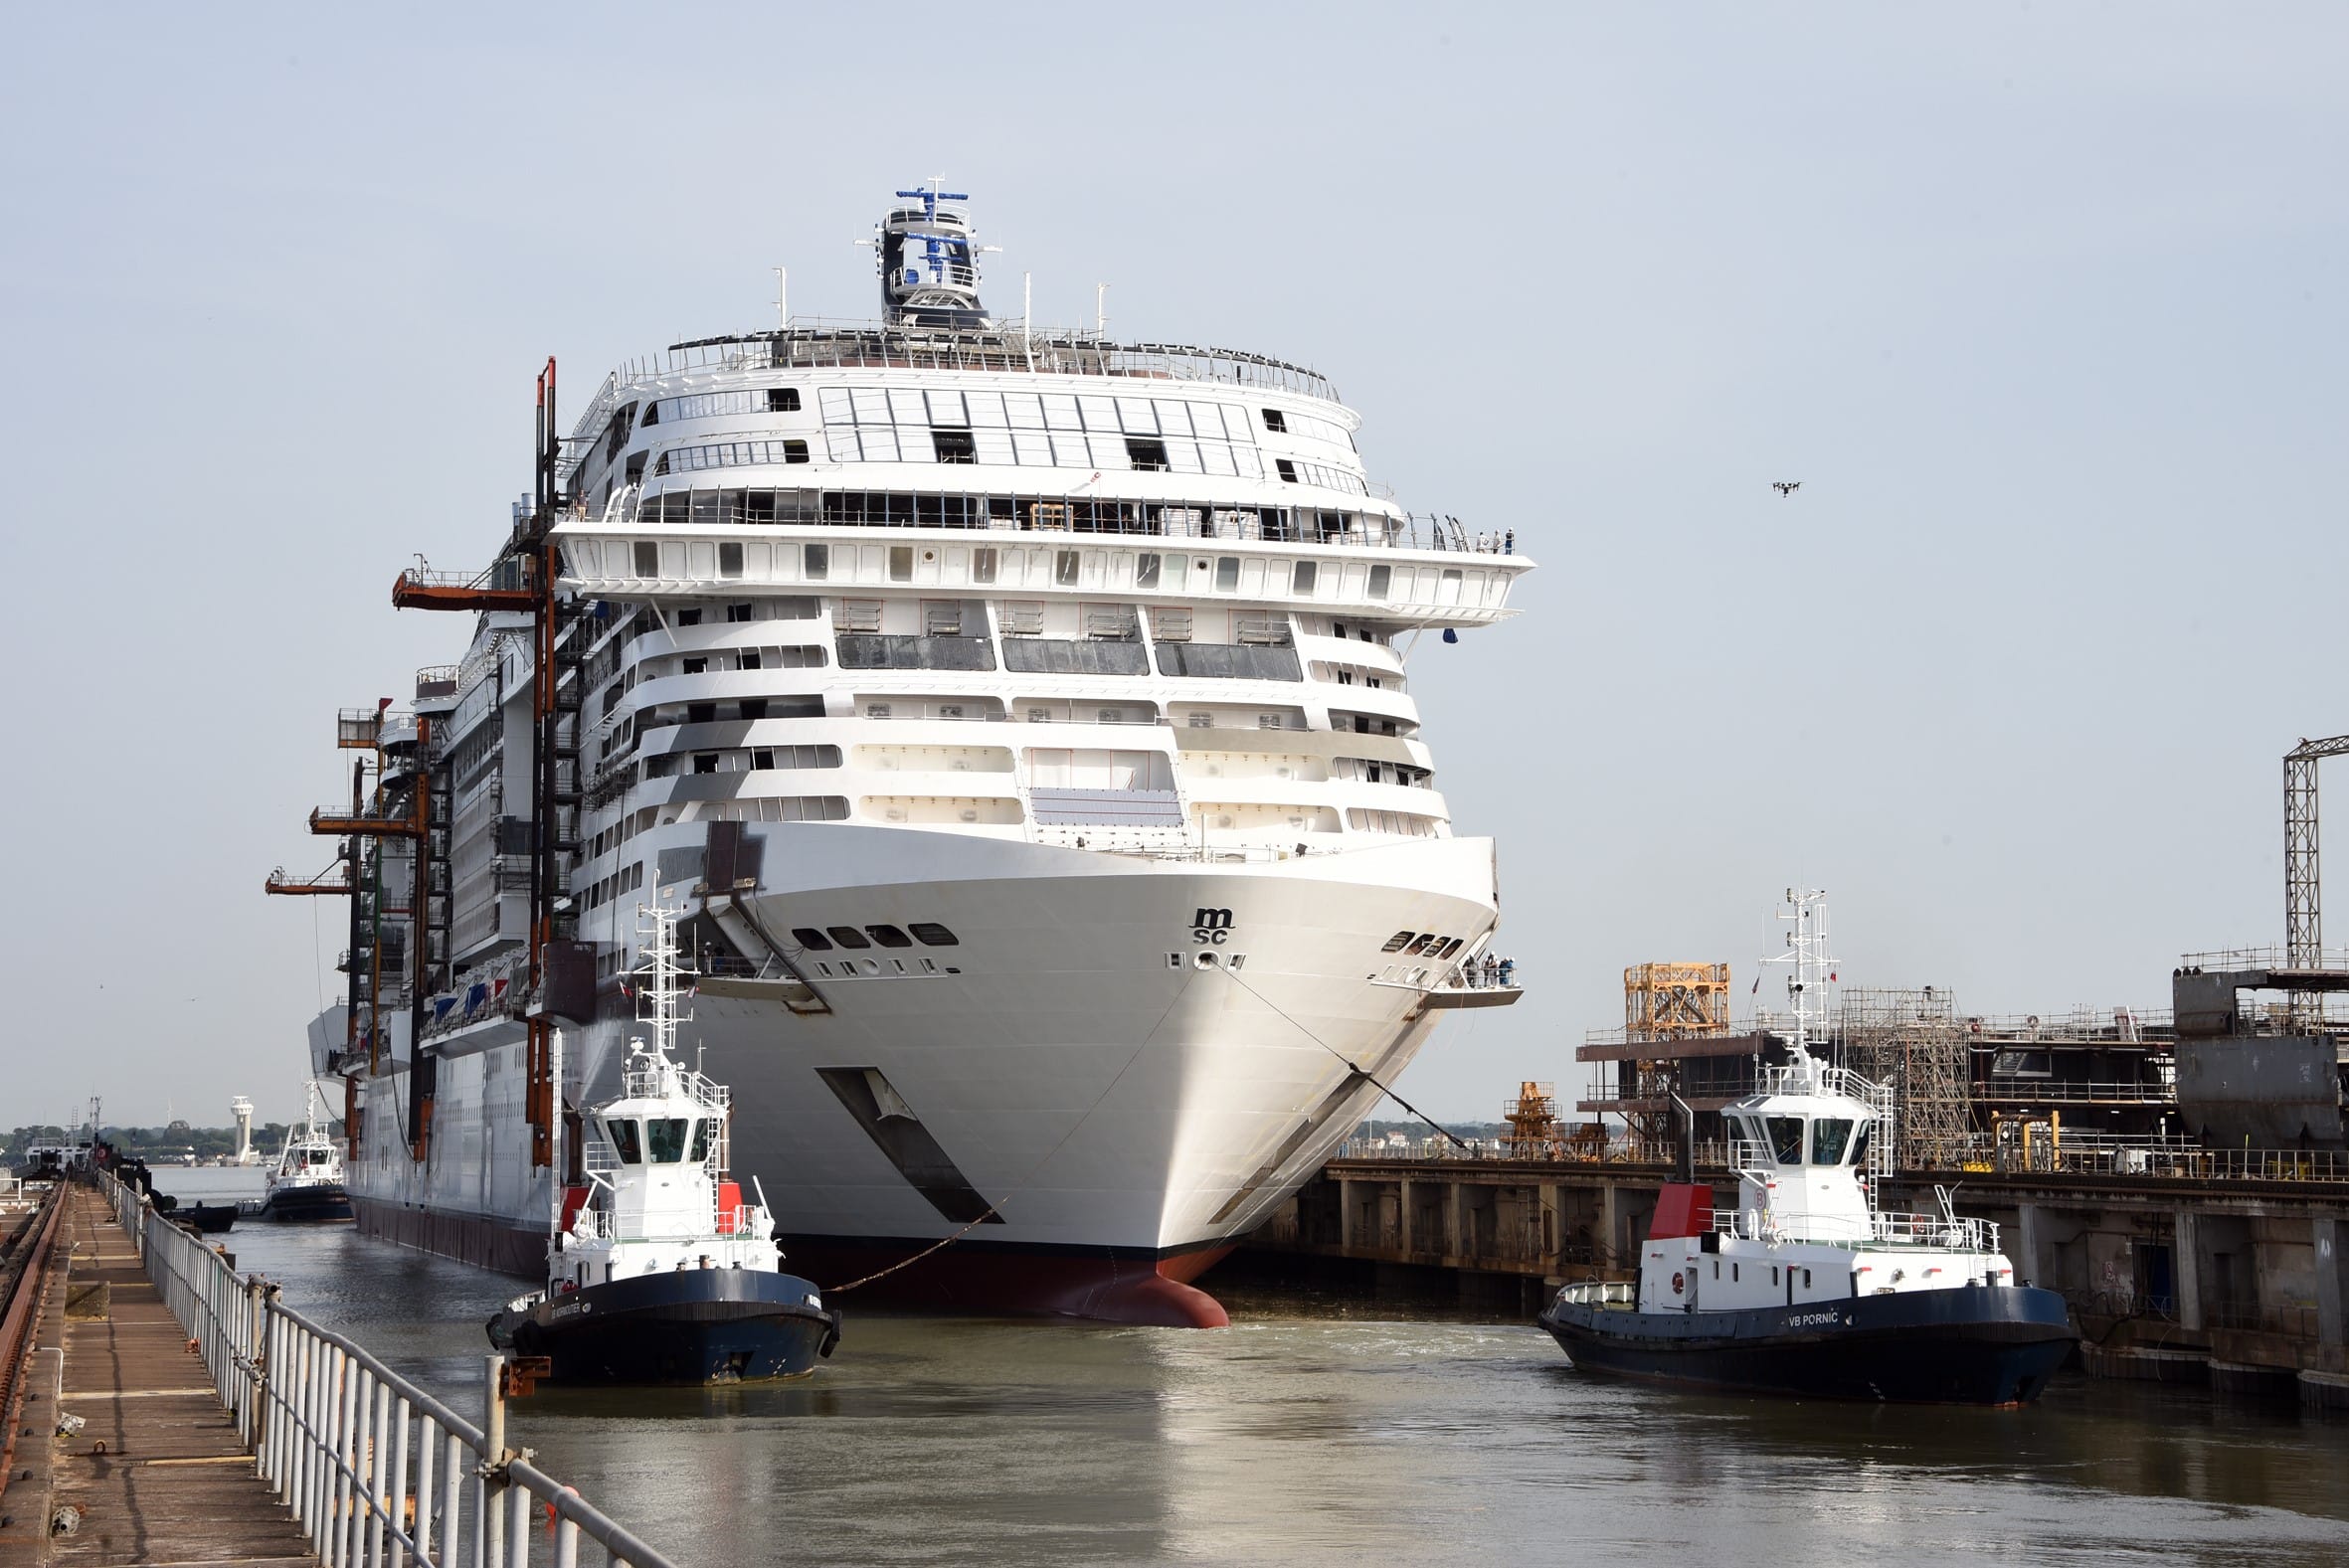 MSC new ship to sail from Southampton